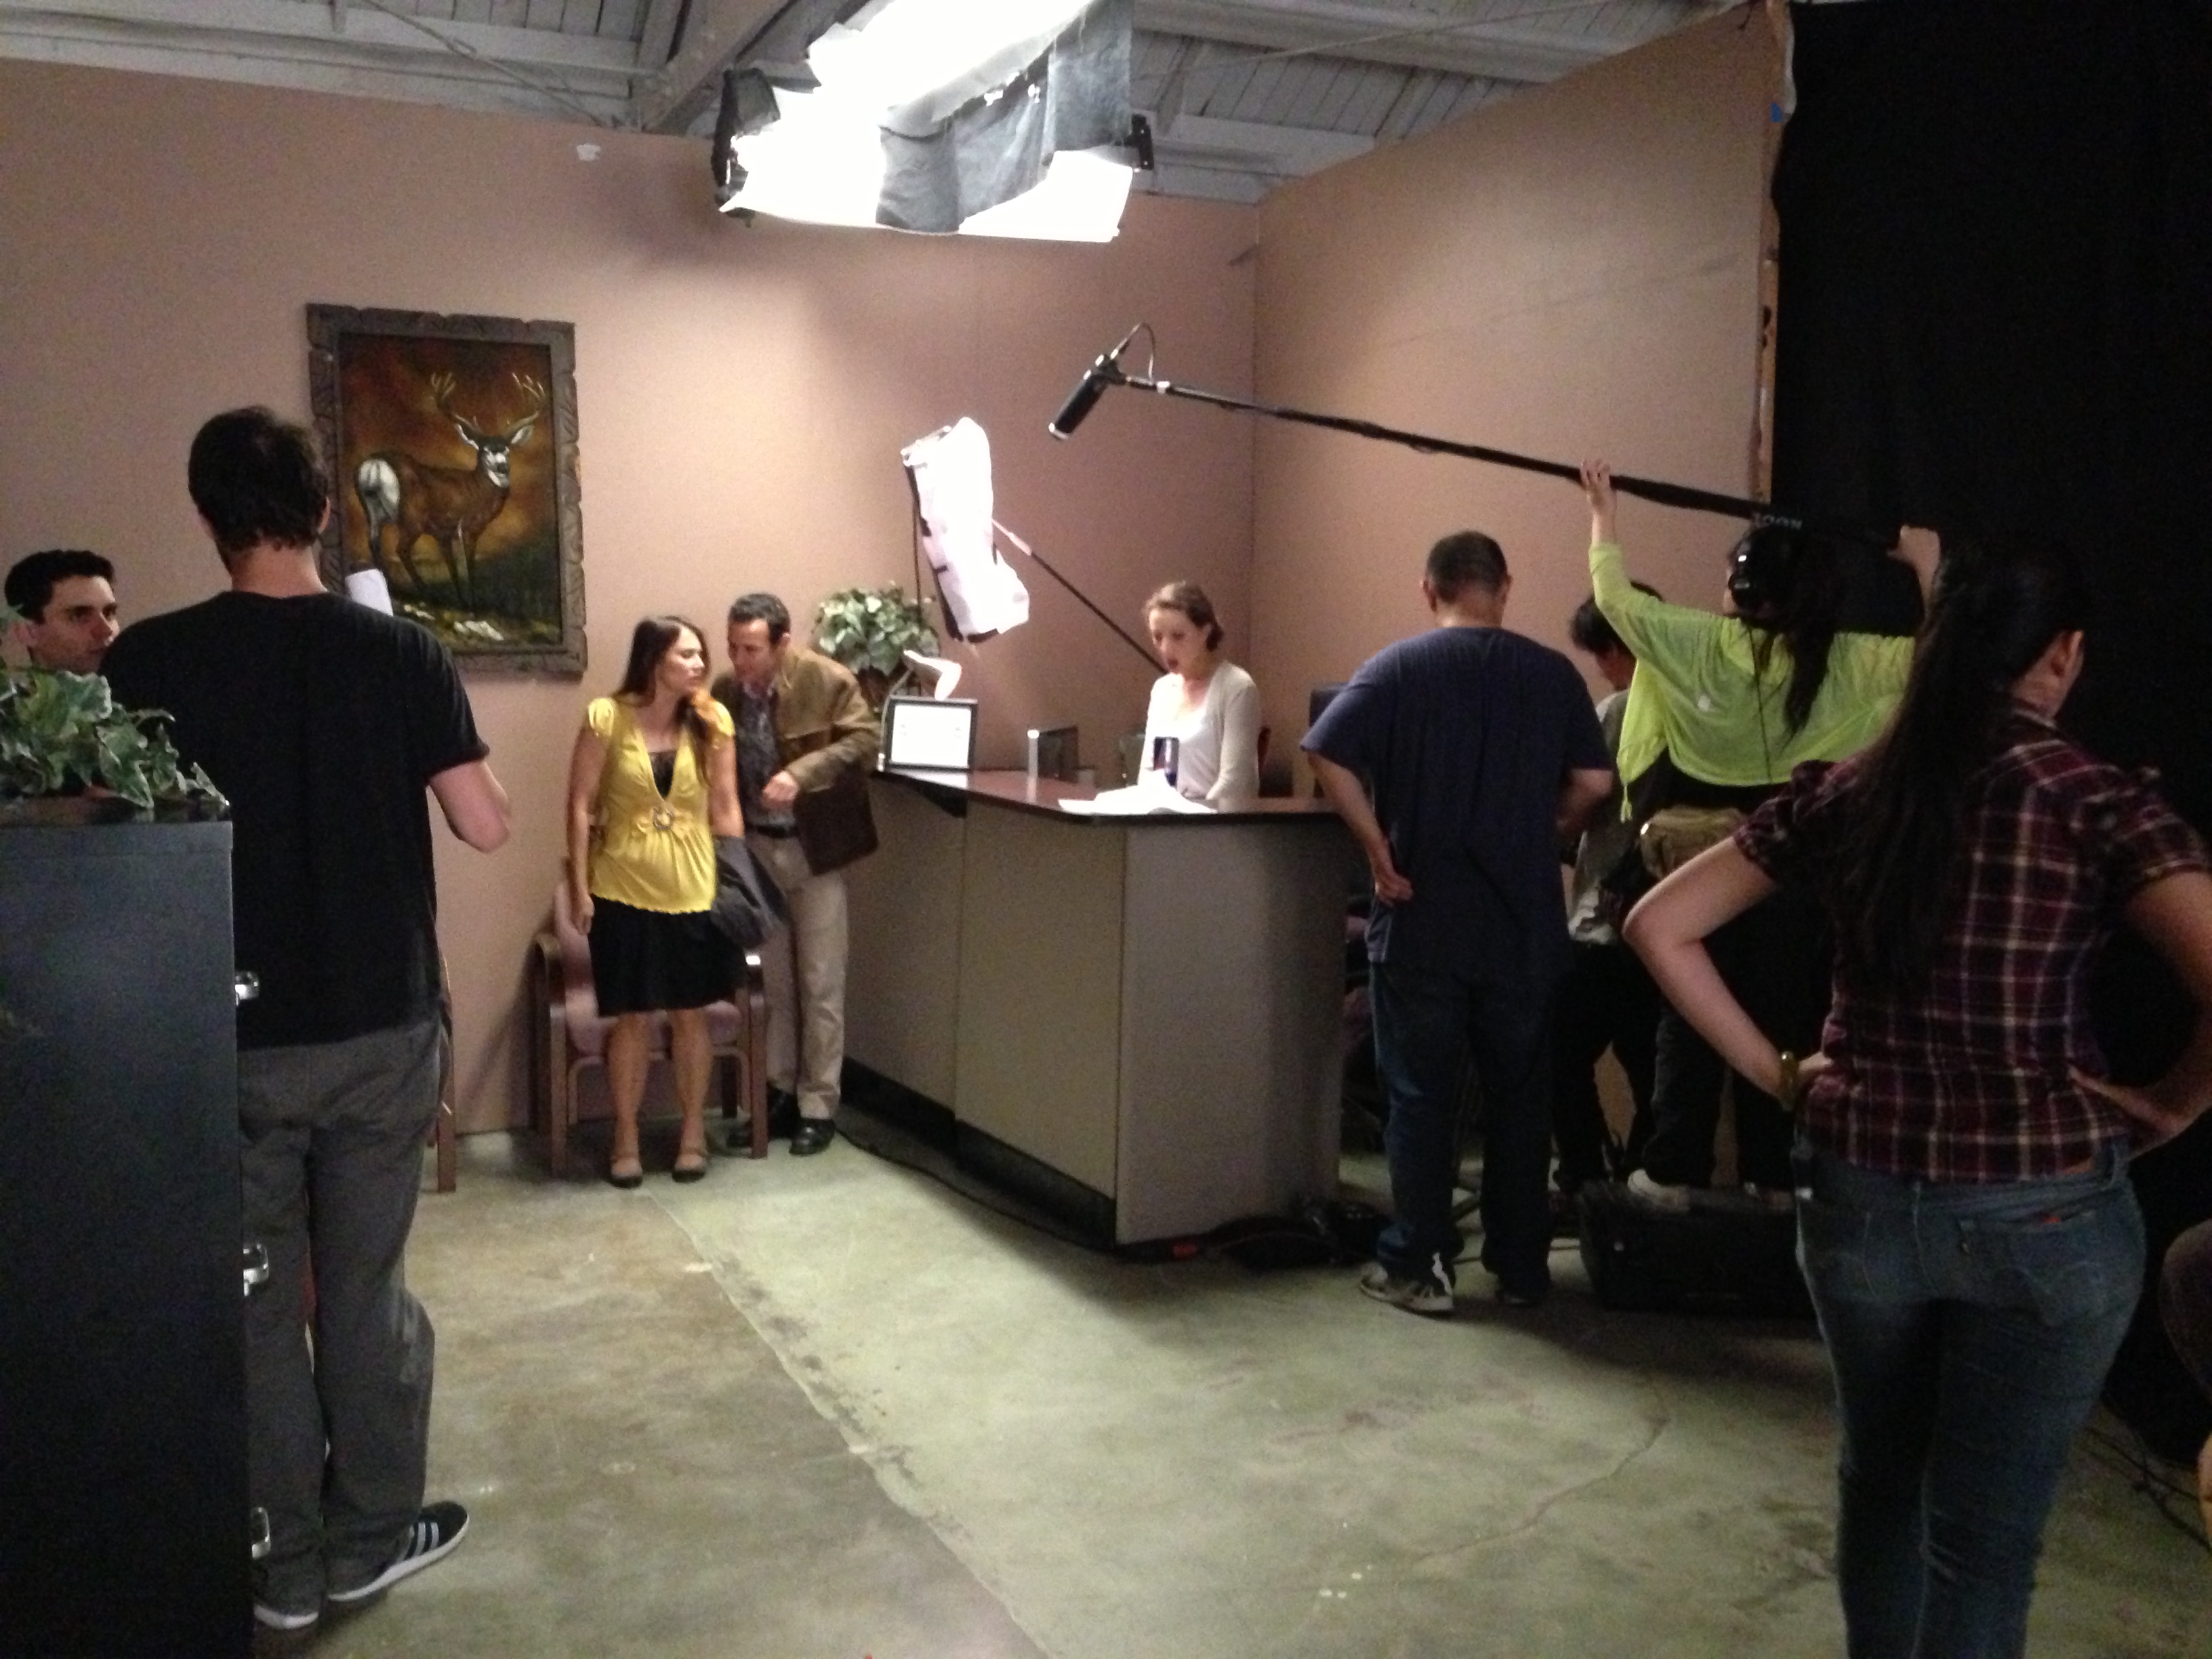 On the set of 'A Declaration and Registration of a Formal Marriage for $75'.